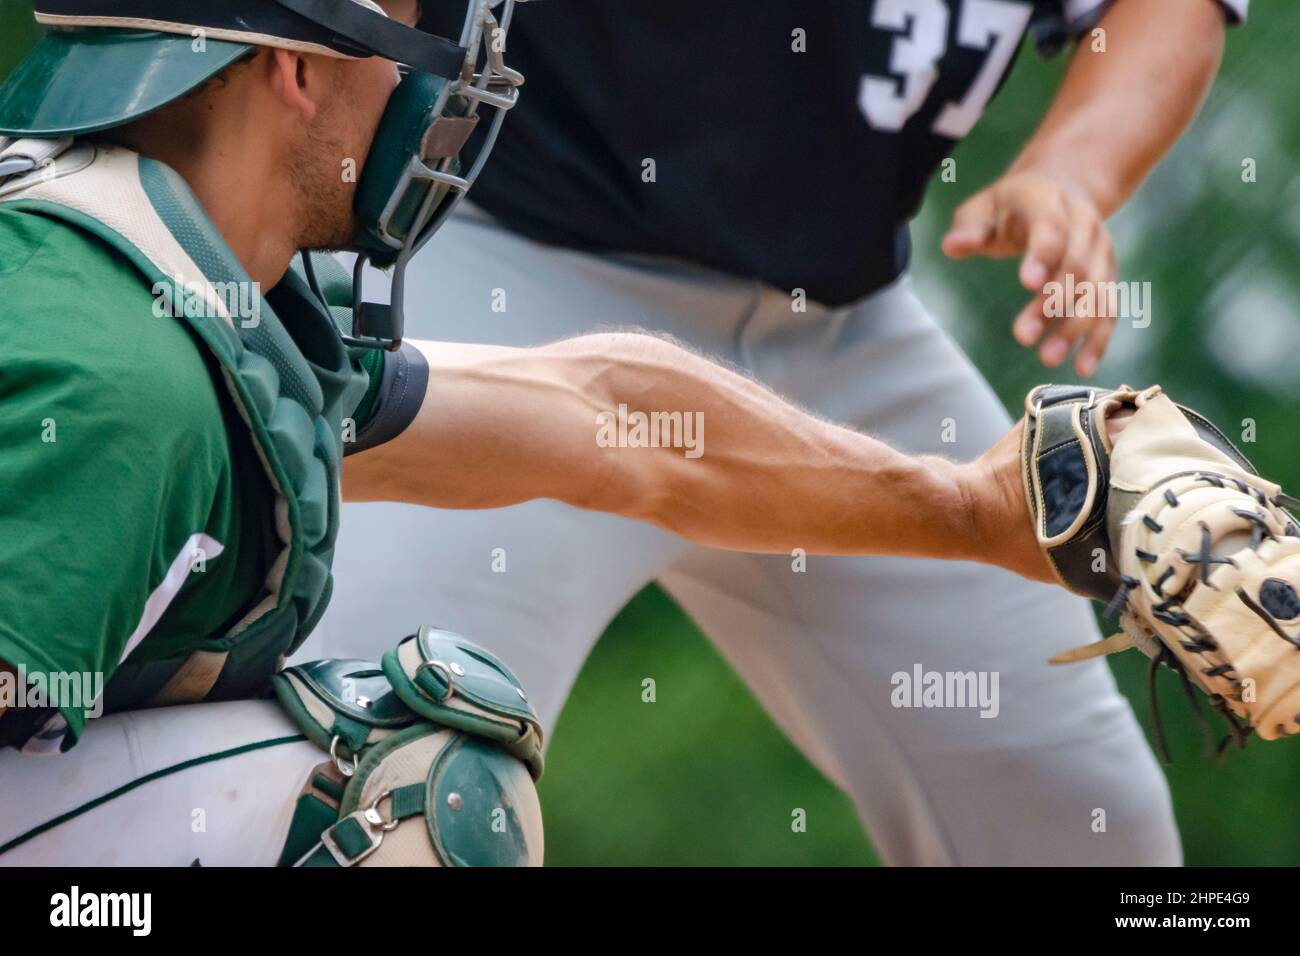 A catcher receives the pitch as the batter watches the ball.  Batter blurred in background. Stock Photo